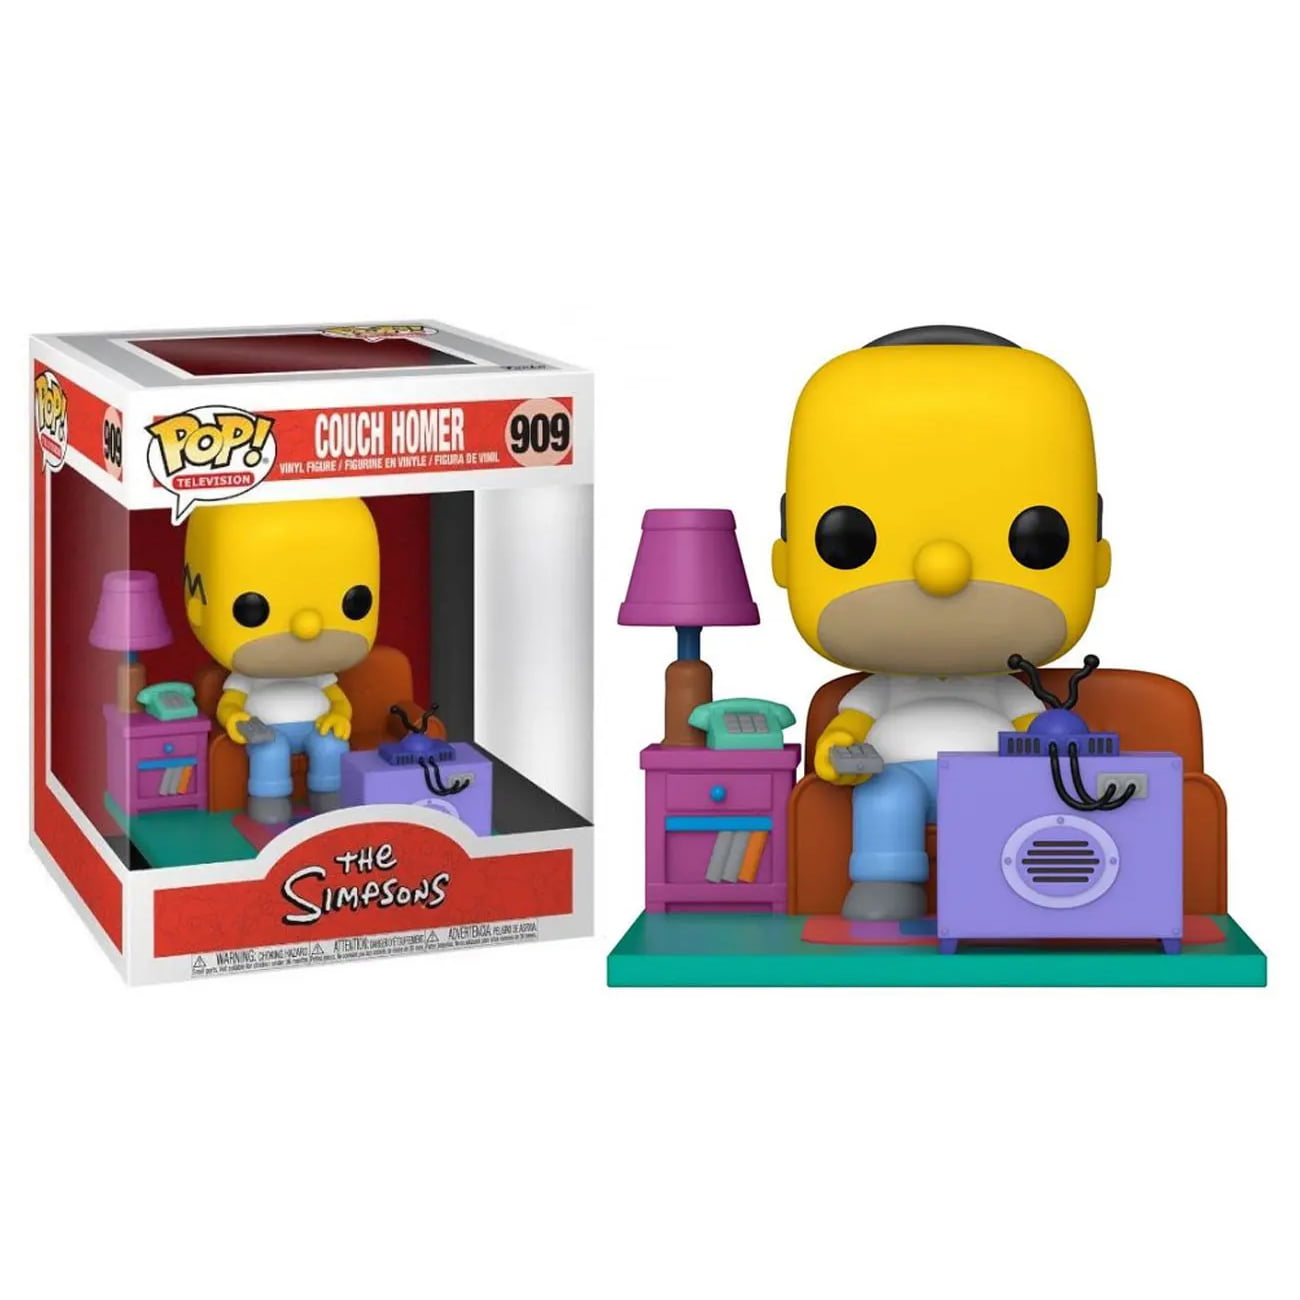 POP! FUNKO - OS SIMPSONS - COUCH HOMER